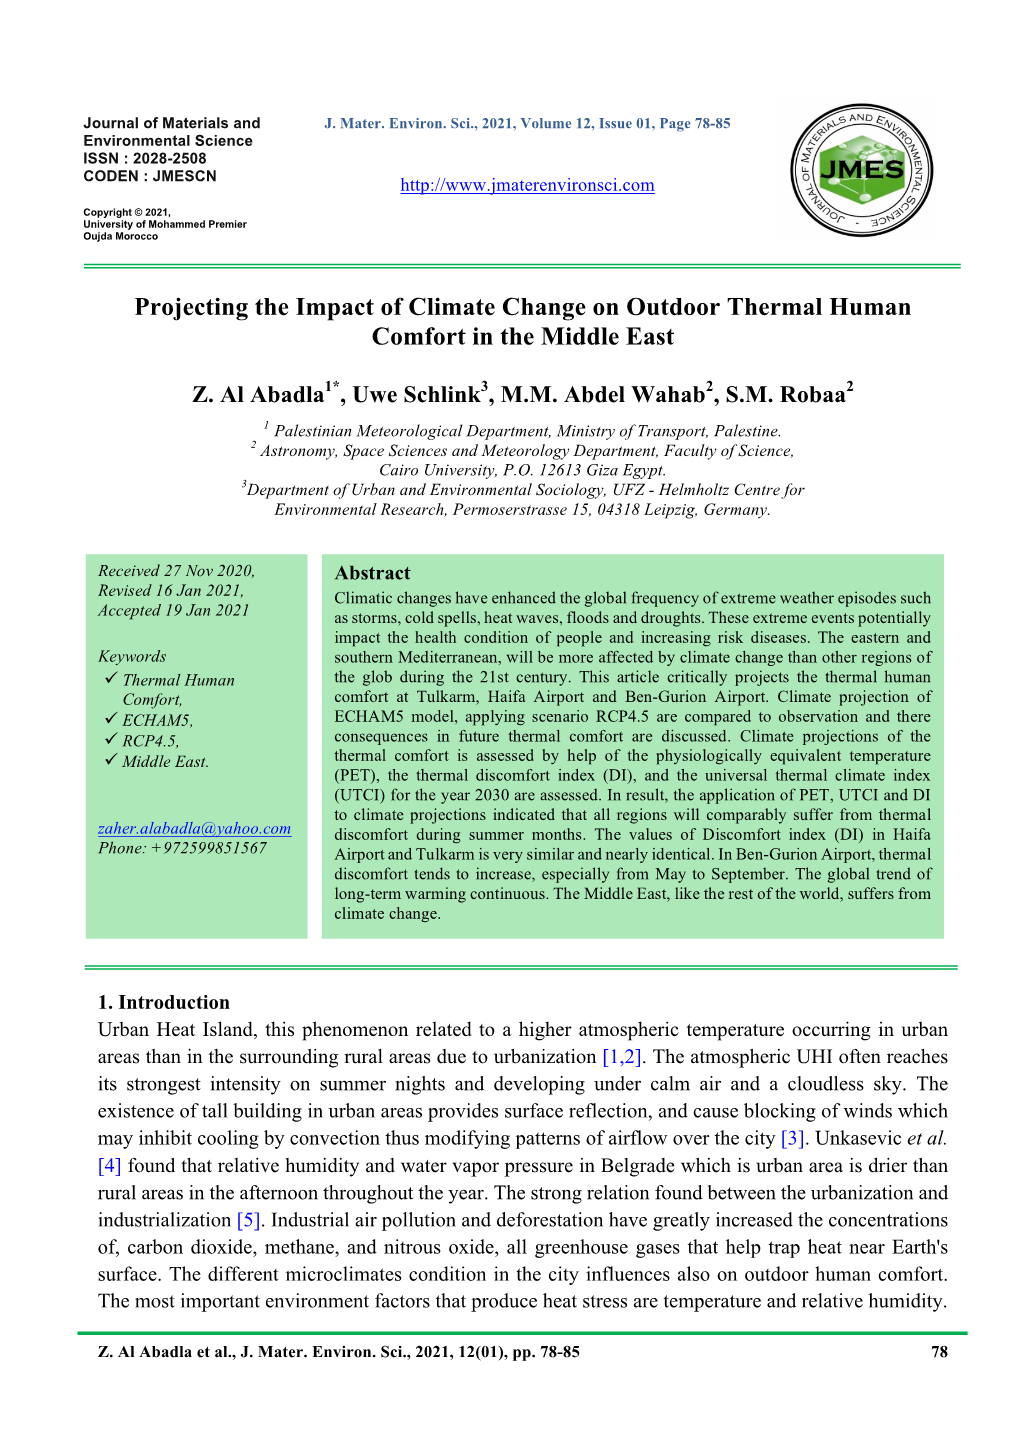 Projecting the Impact of Climate Change on Outdoor Thermal Human Comfort in the Middle East